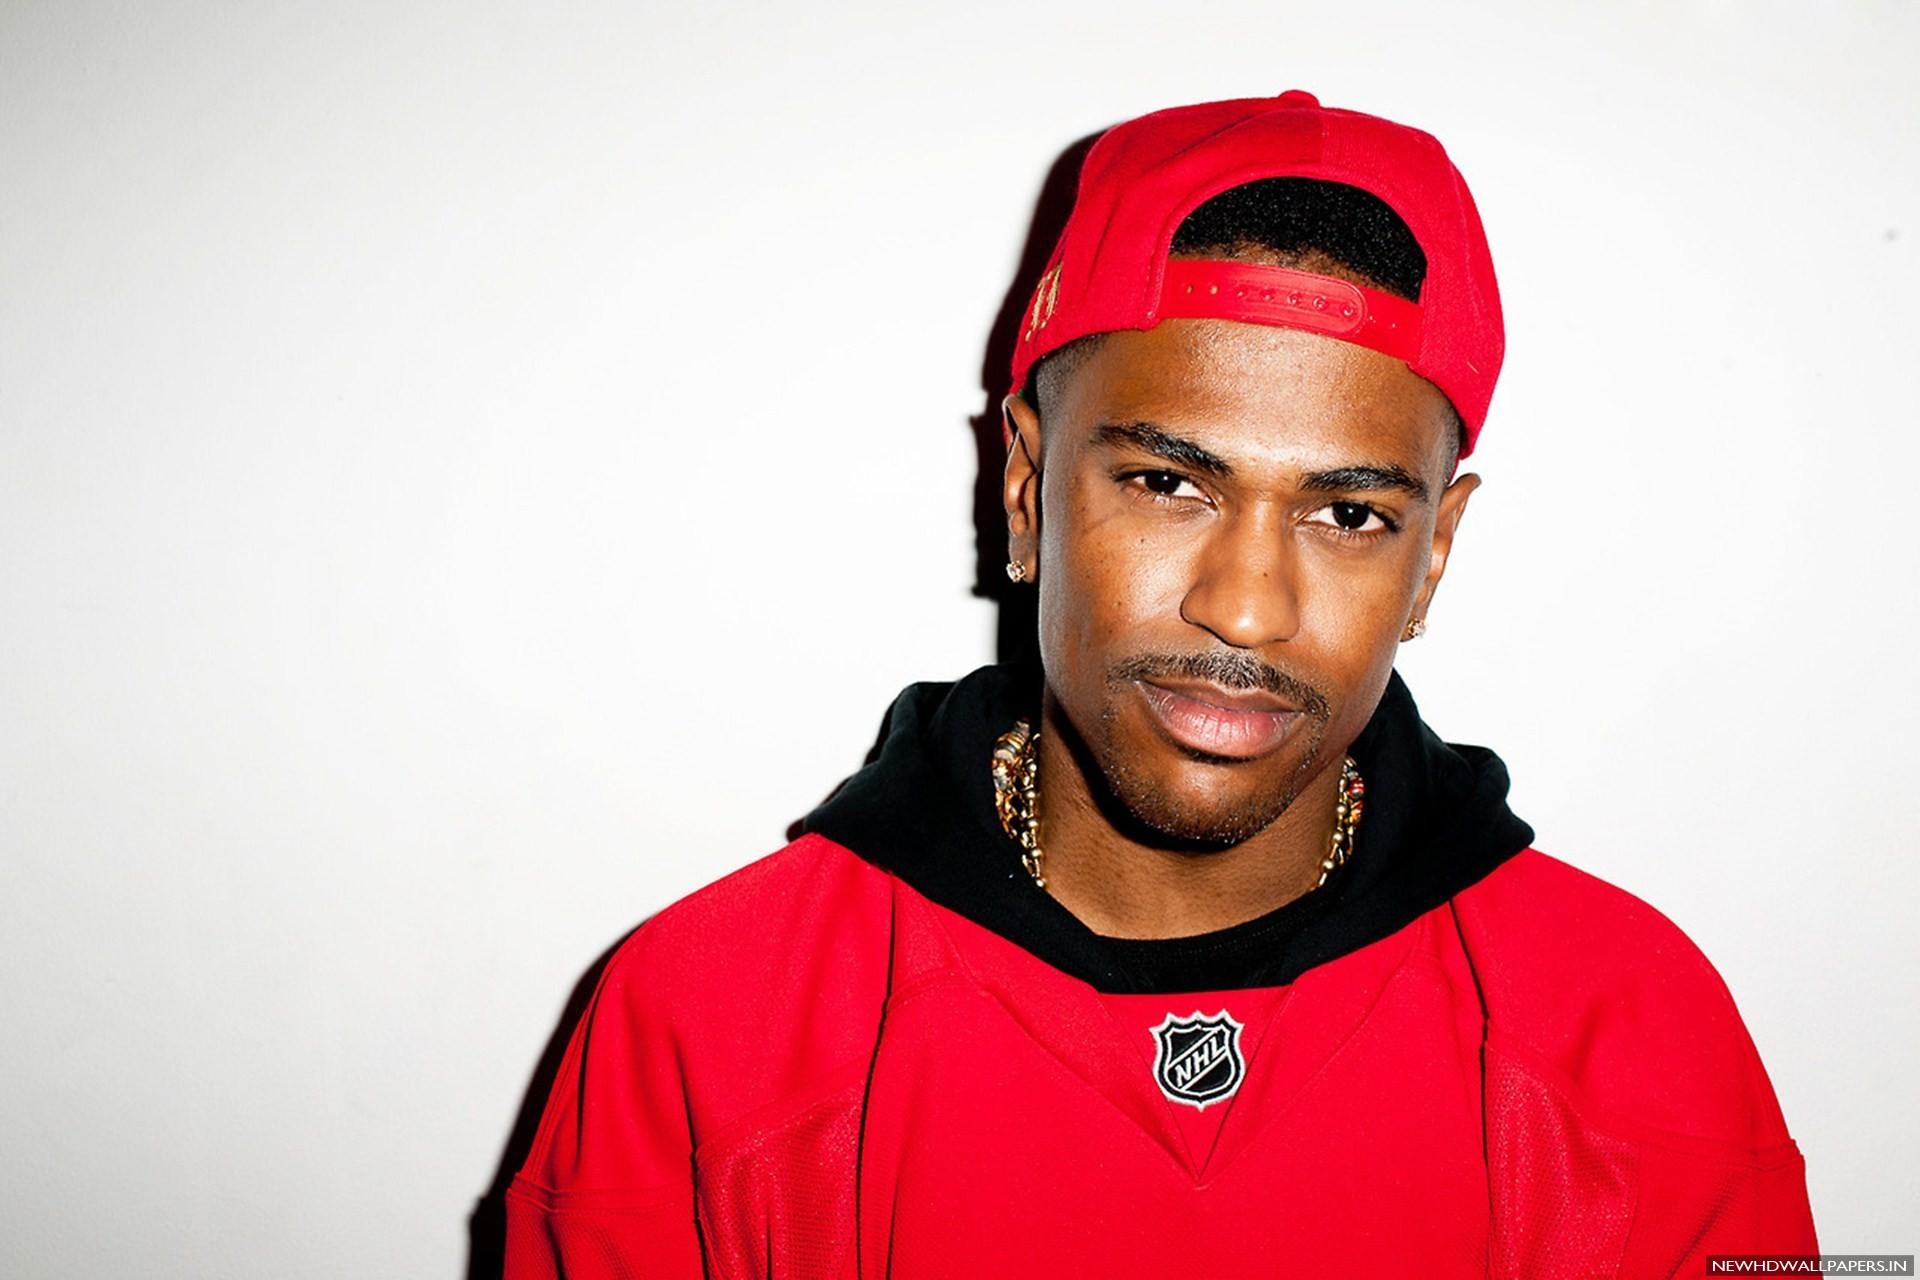 Big Sean thinks he had a better verse than Kendrick on 'Control'